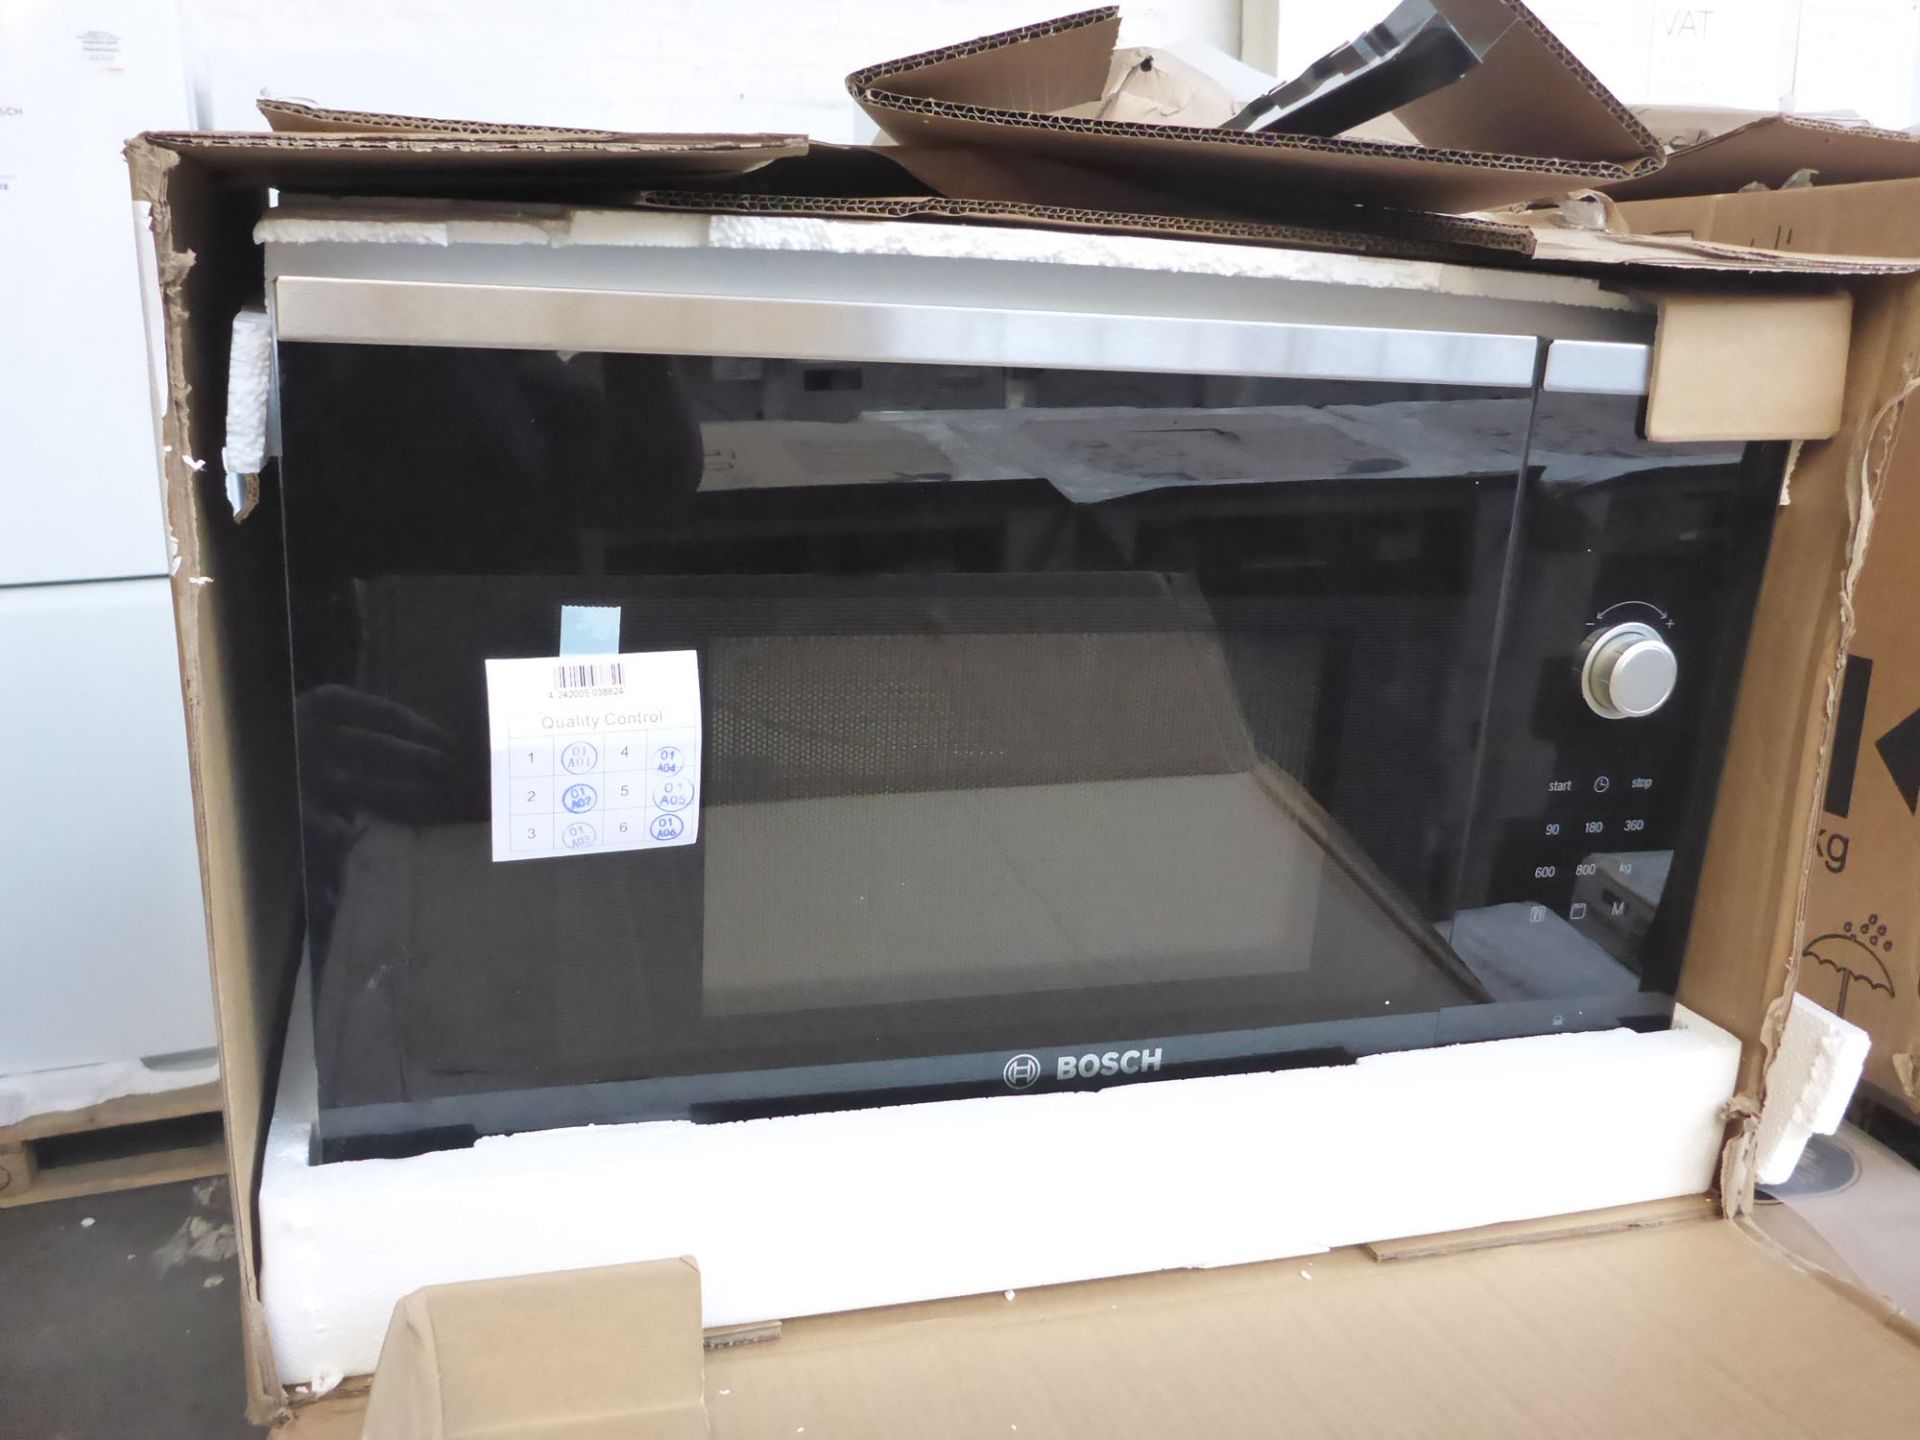 BEL523MS0BB Bosch Built-in microwave oven